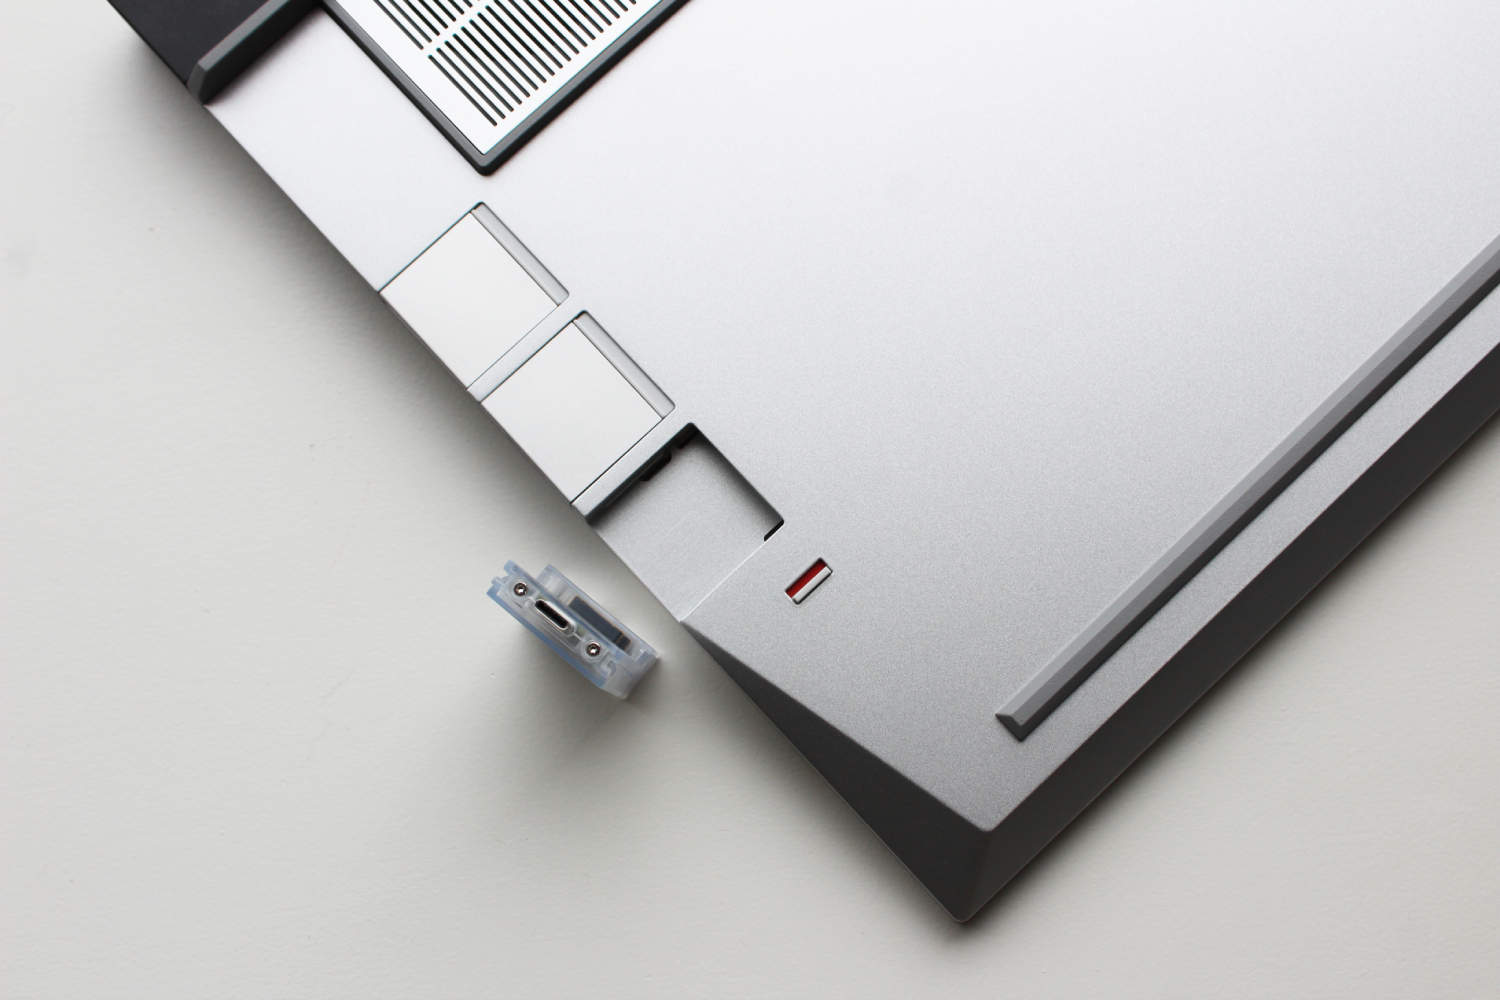 The expandable slots on the back of the Framework Laptop 16.